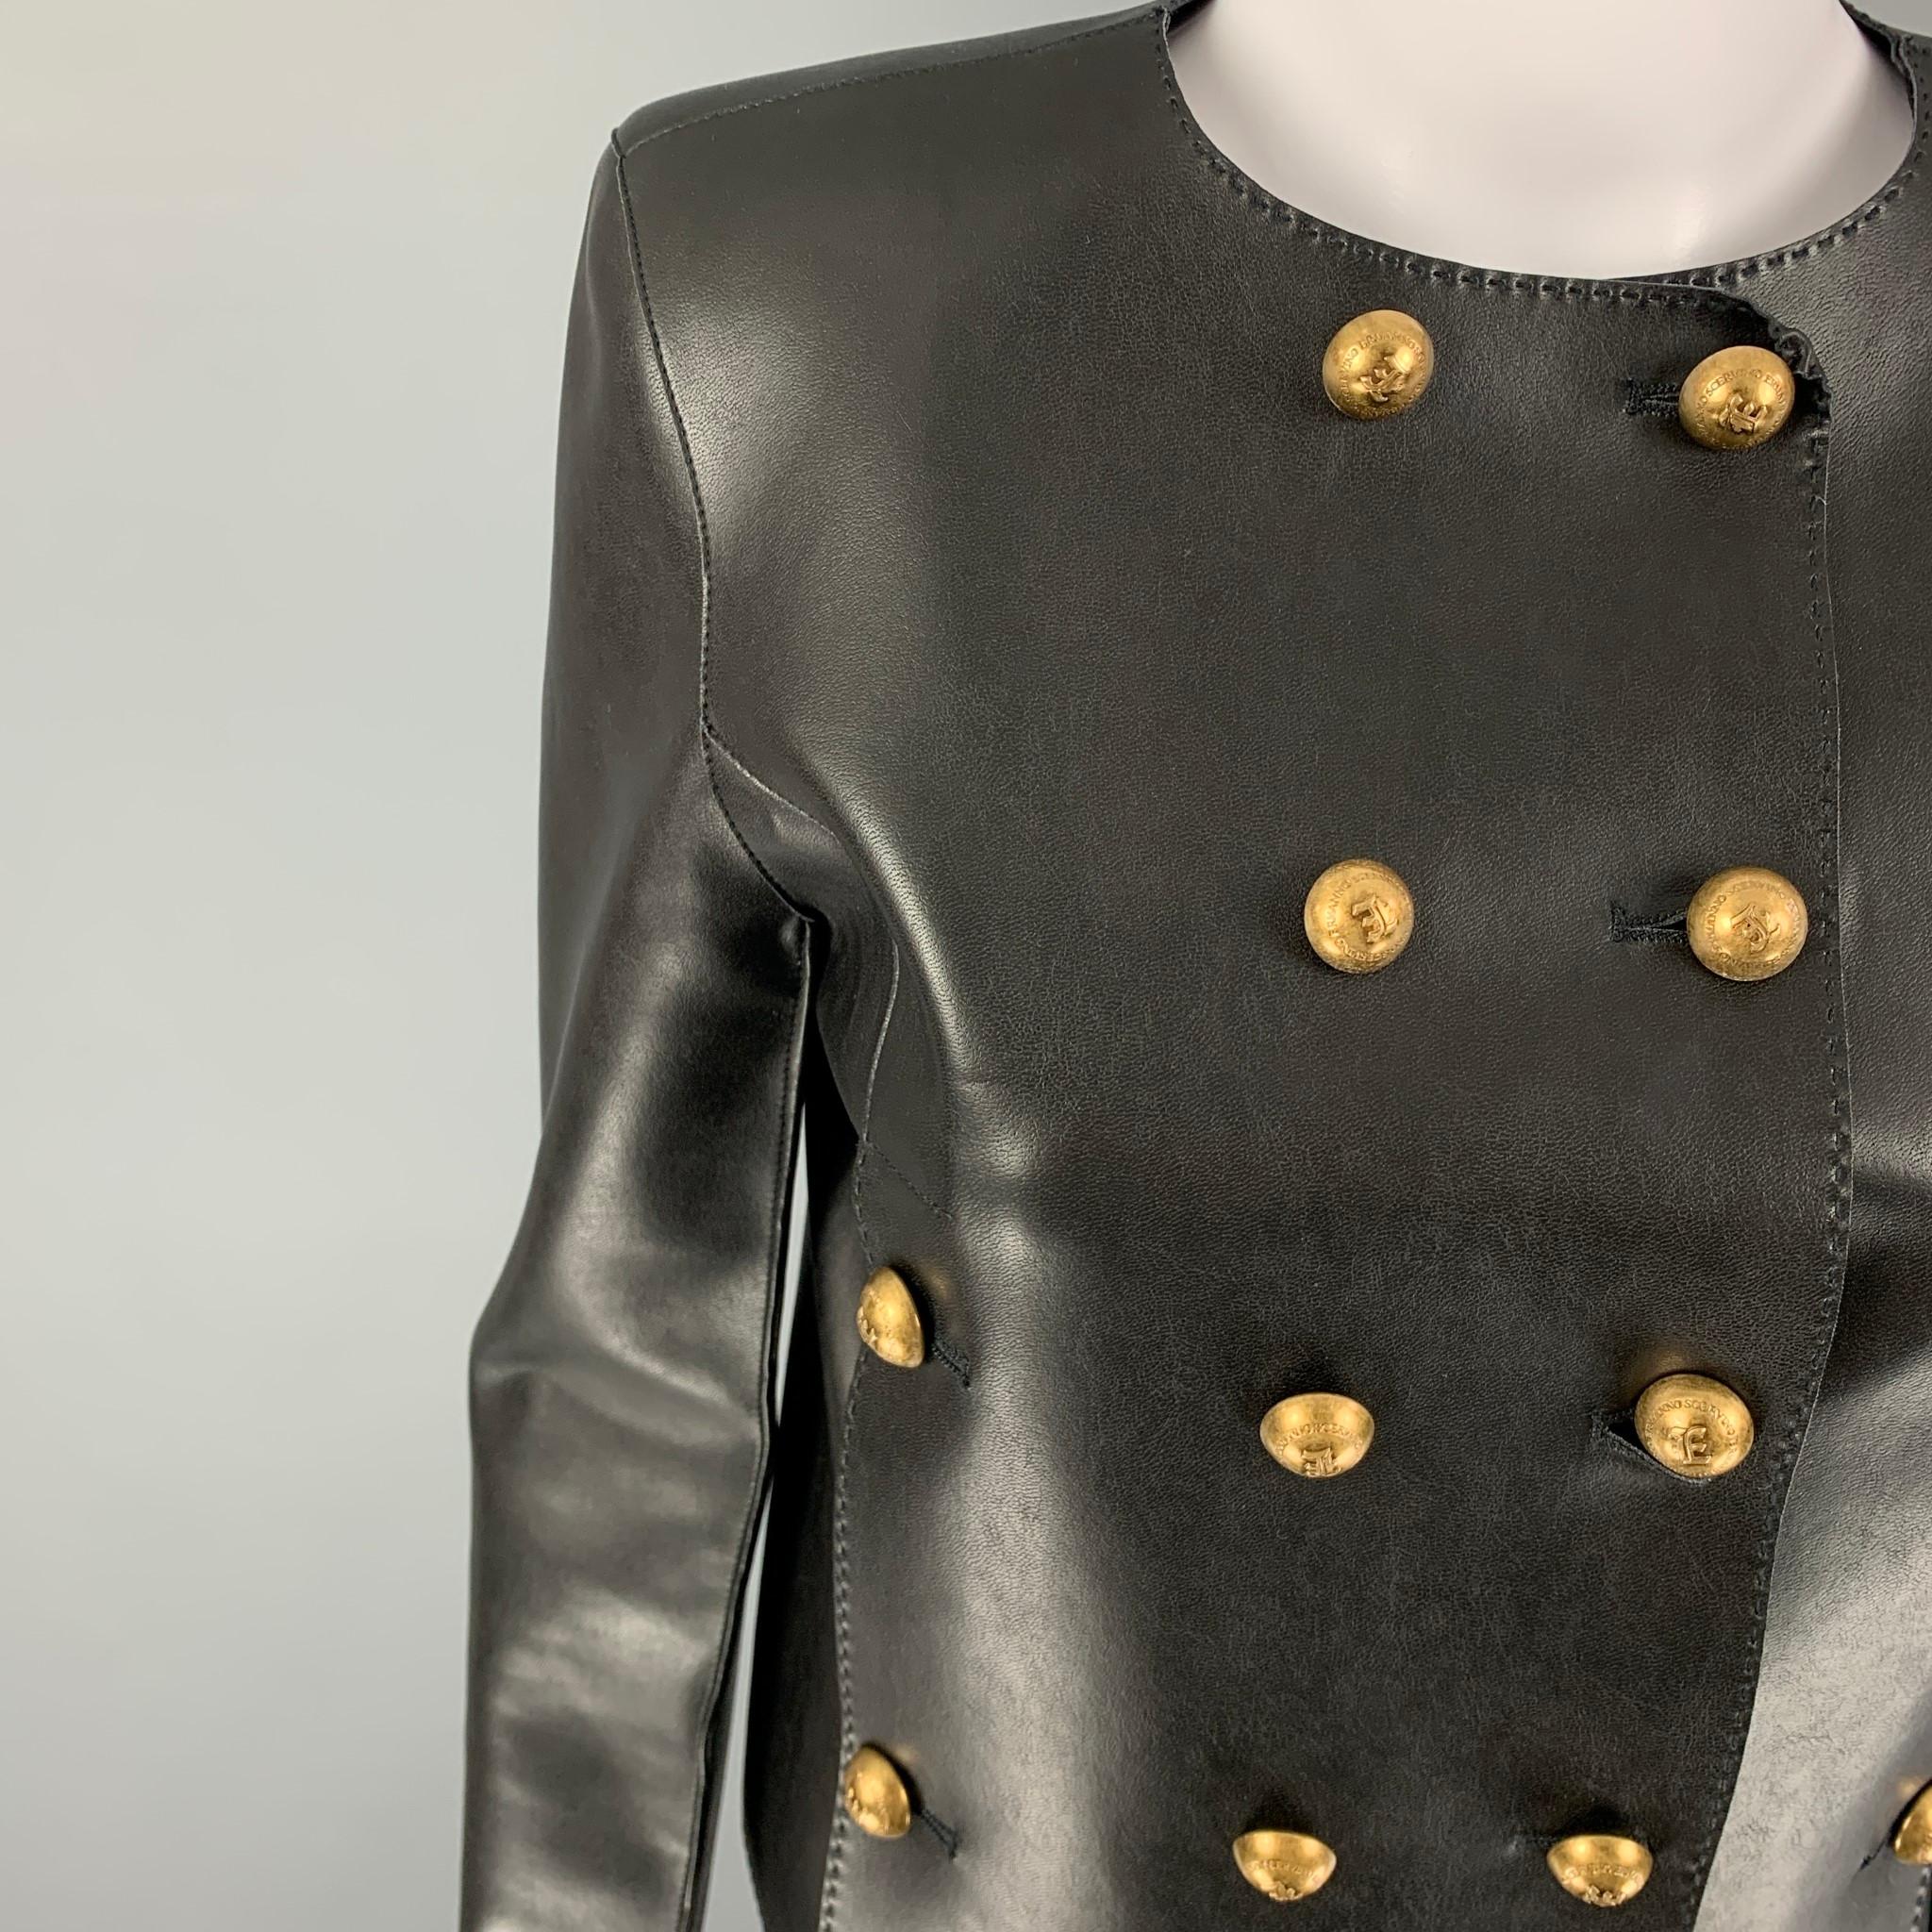 ERMANNO SCERVINO jacket comes in a black polyamide faux leather featuring a military style, collarless, gold tone buttons, and a double breasted closure. 

New with tags. 
Marked: 38

Measurements:

Shoulder: 15 in.
Bust: 34 in.
Sleeve: 24.5